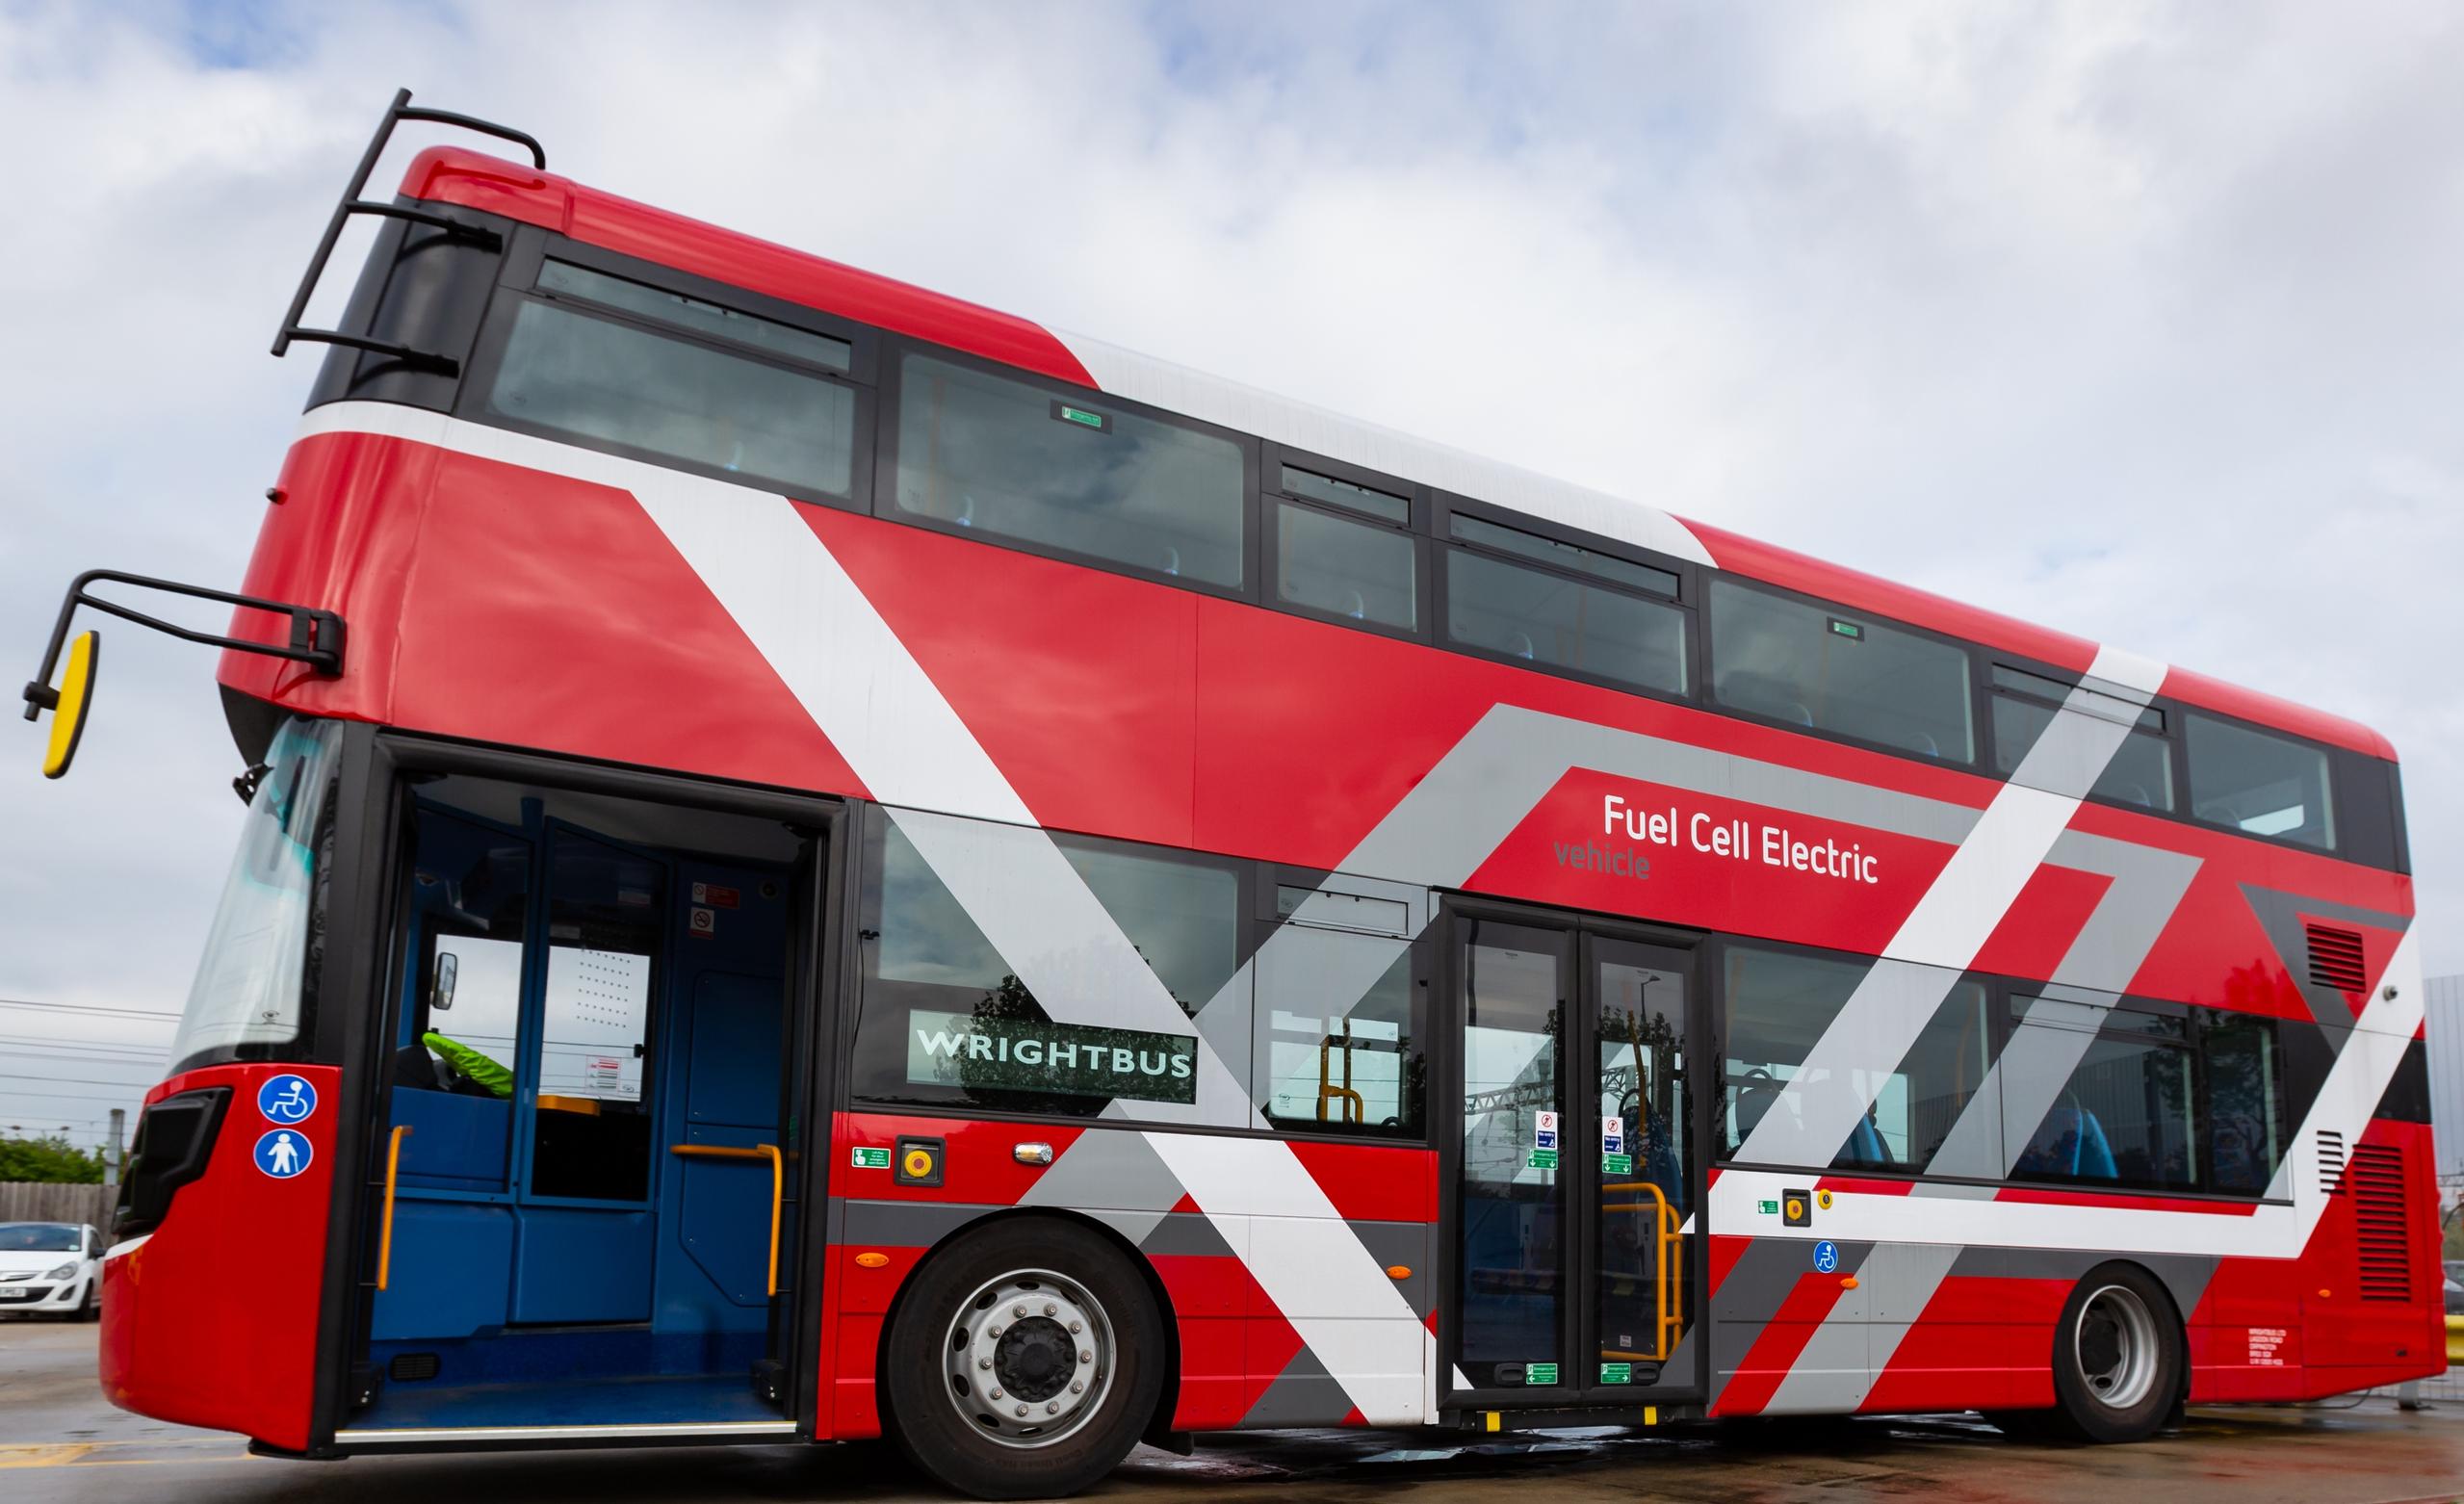 The hydrigen cell fuel Wrightbus